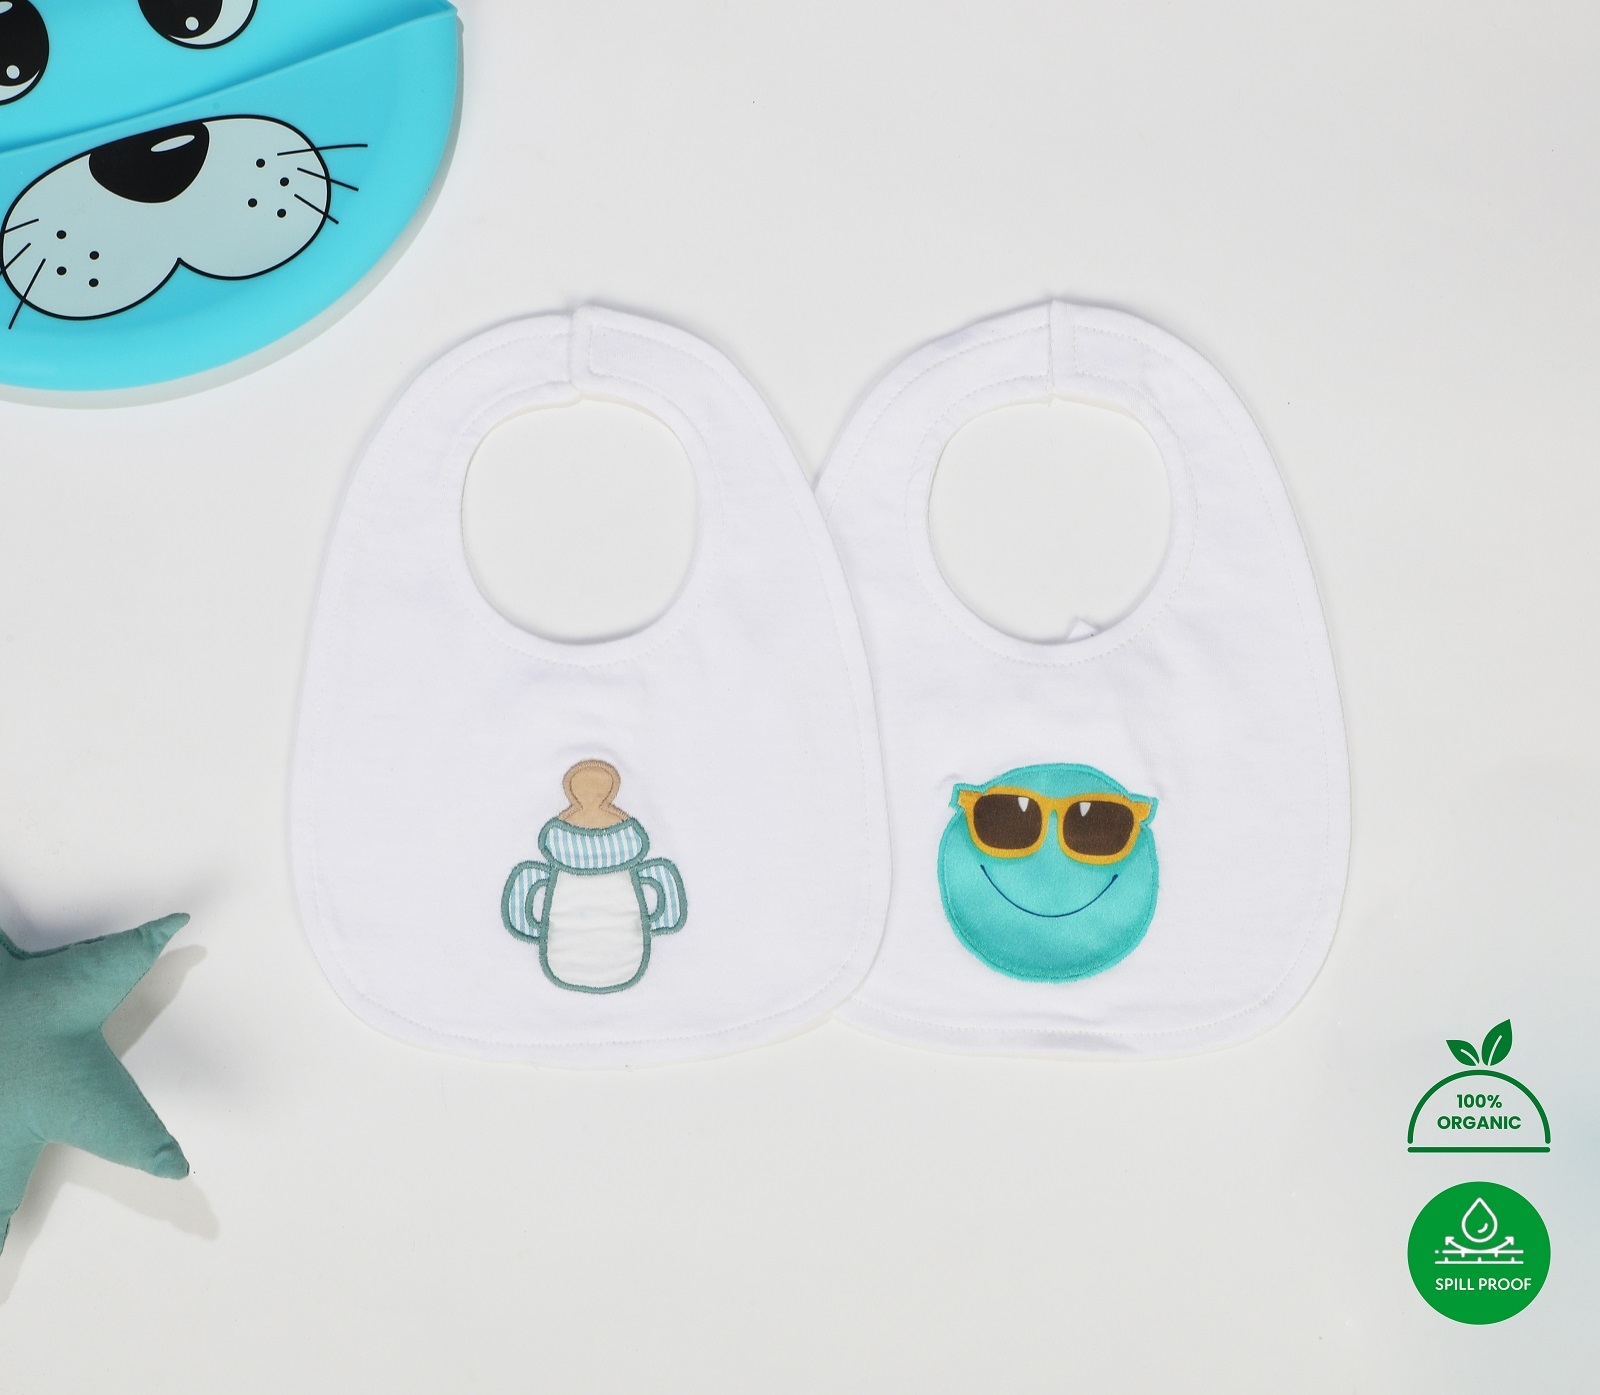 Kidbea | Printed Baby Blue and White Feeding Bib With Spill-Proof Finish